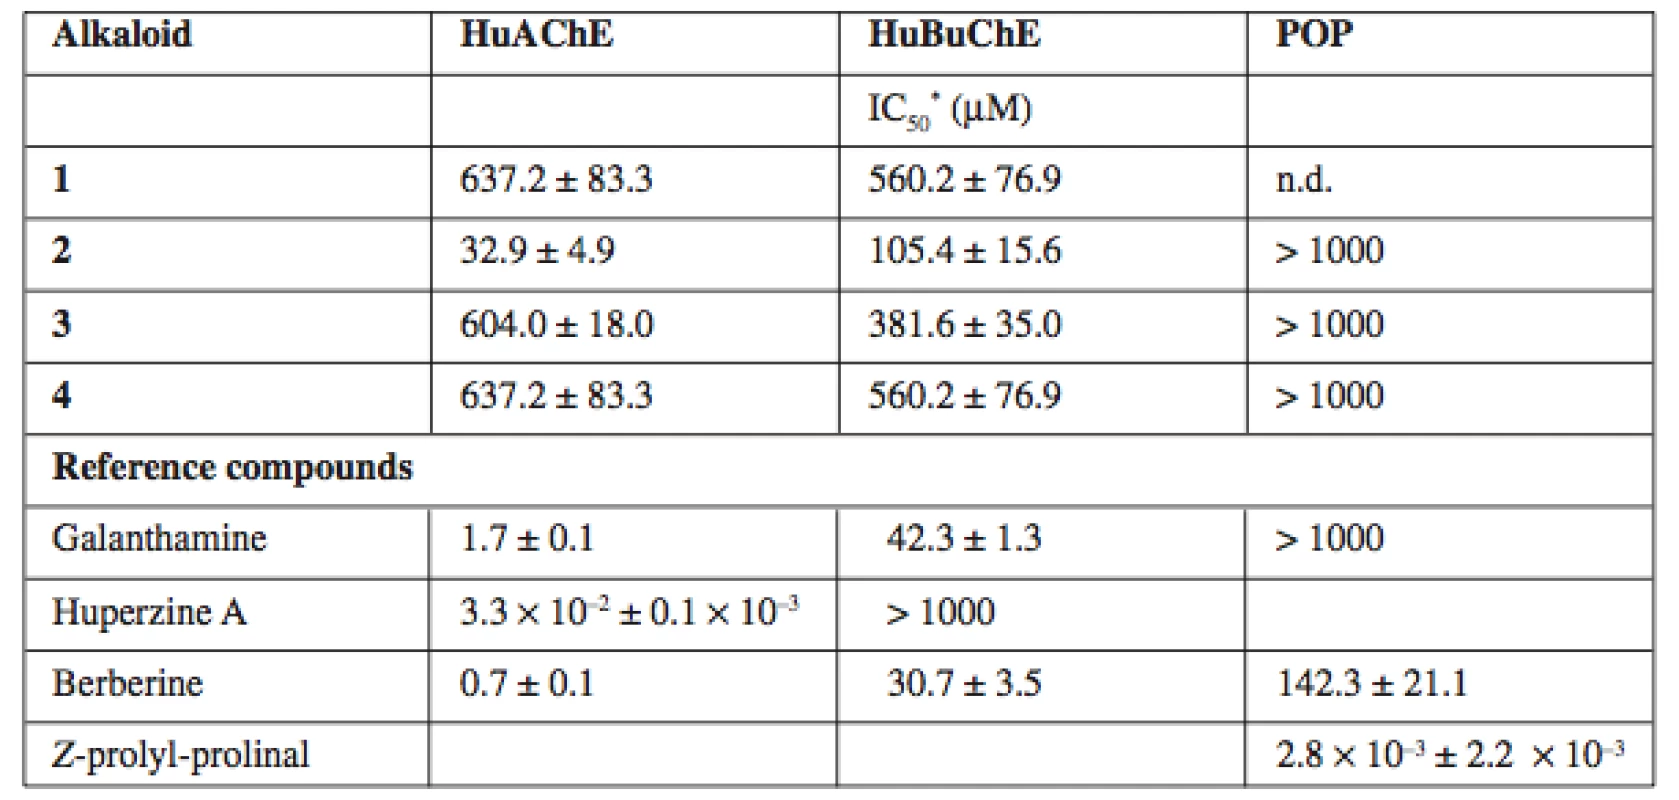 HuAChE, HuBuChE and POP inhibition activity of the alkaloids isolated from Hydrastis canadensis extract